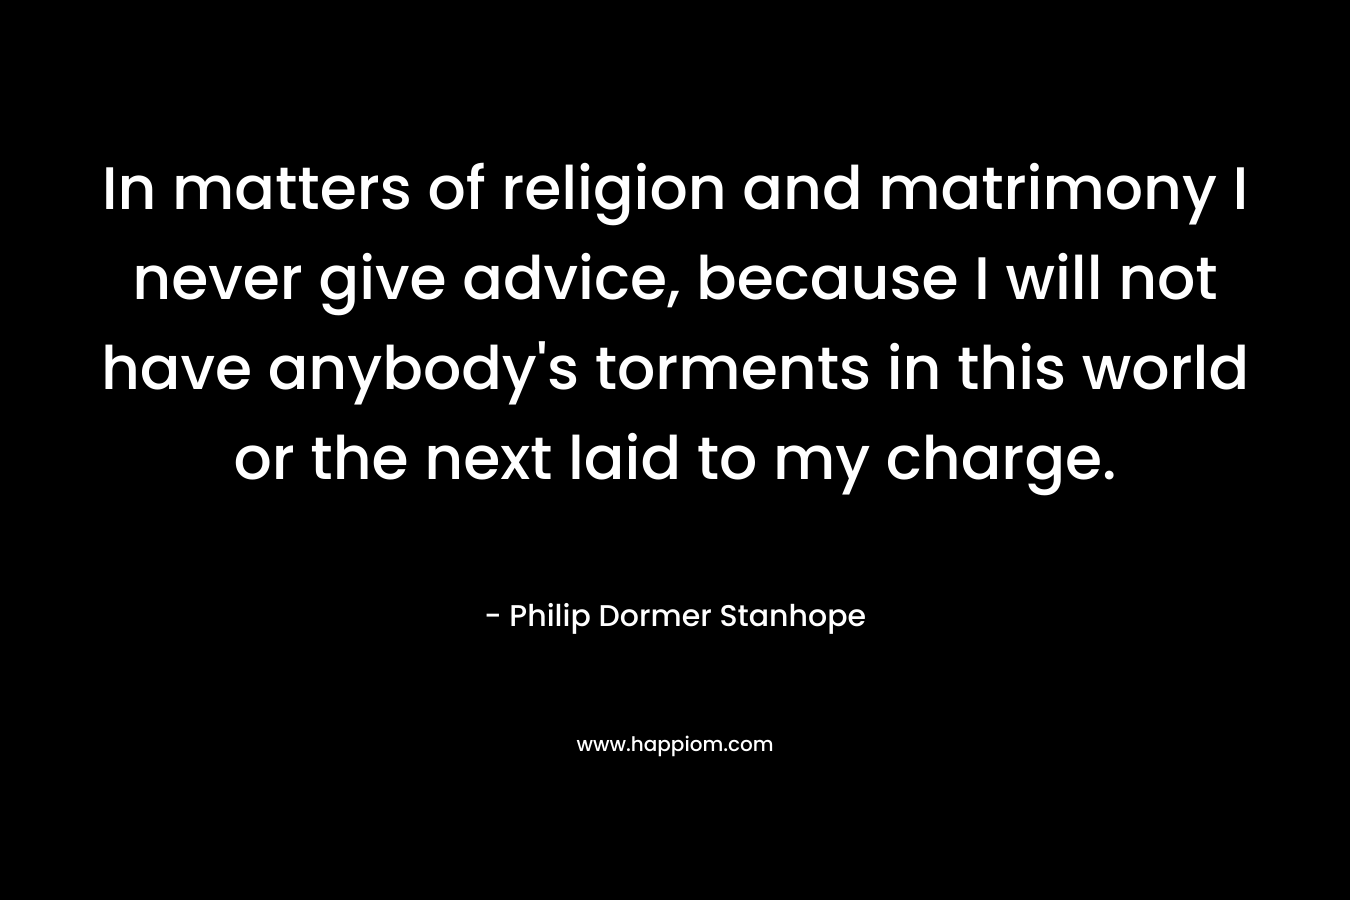 In matters of religion and matrimony I never give advice, because I will not have anybody’s torments in this world or the next laid to my charge. – Philip Dormer Stanhope